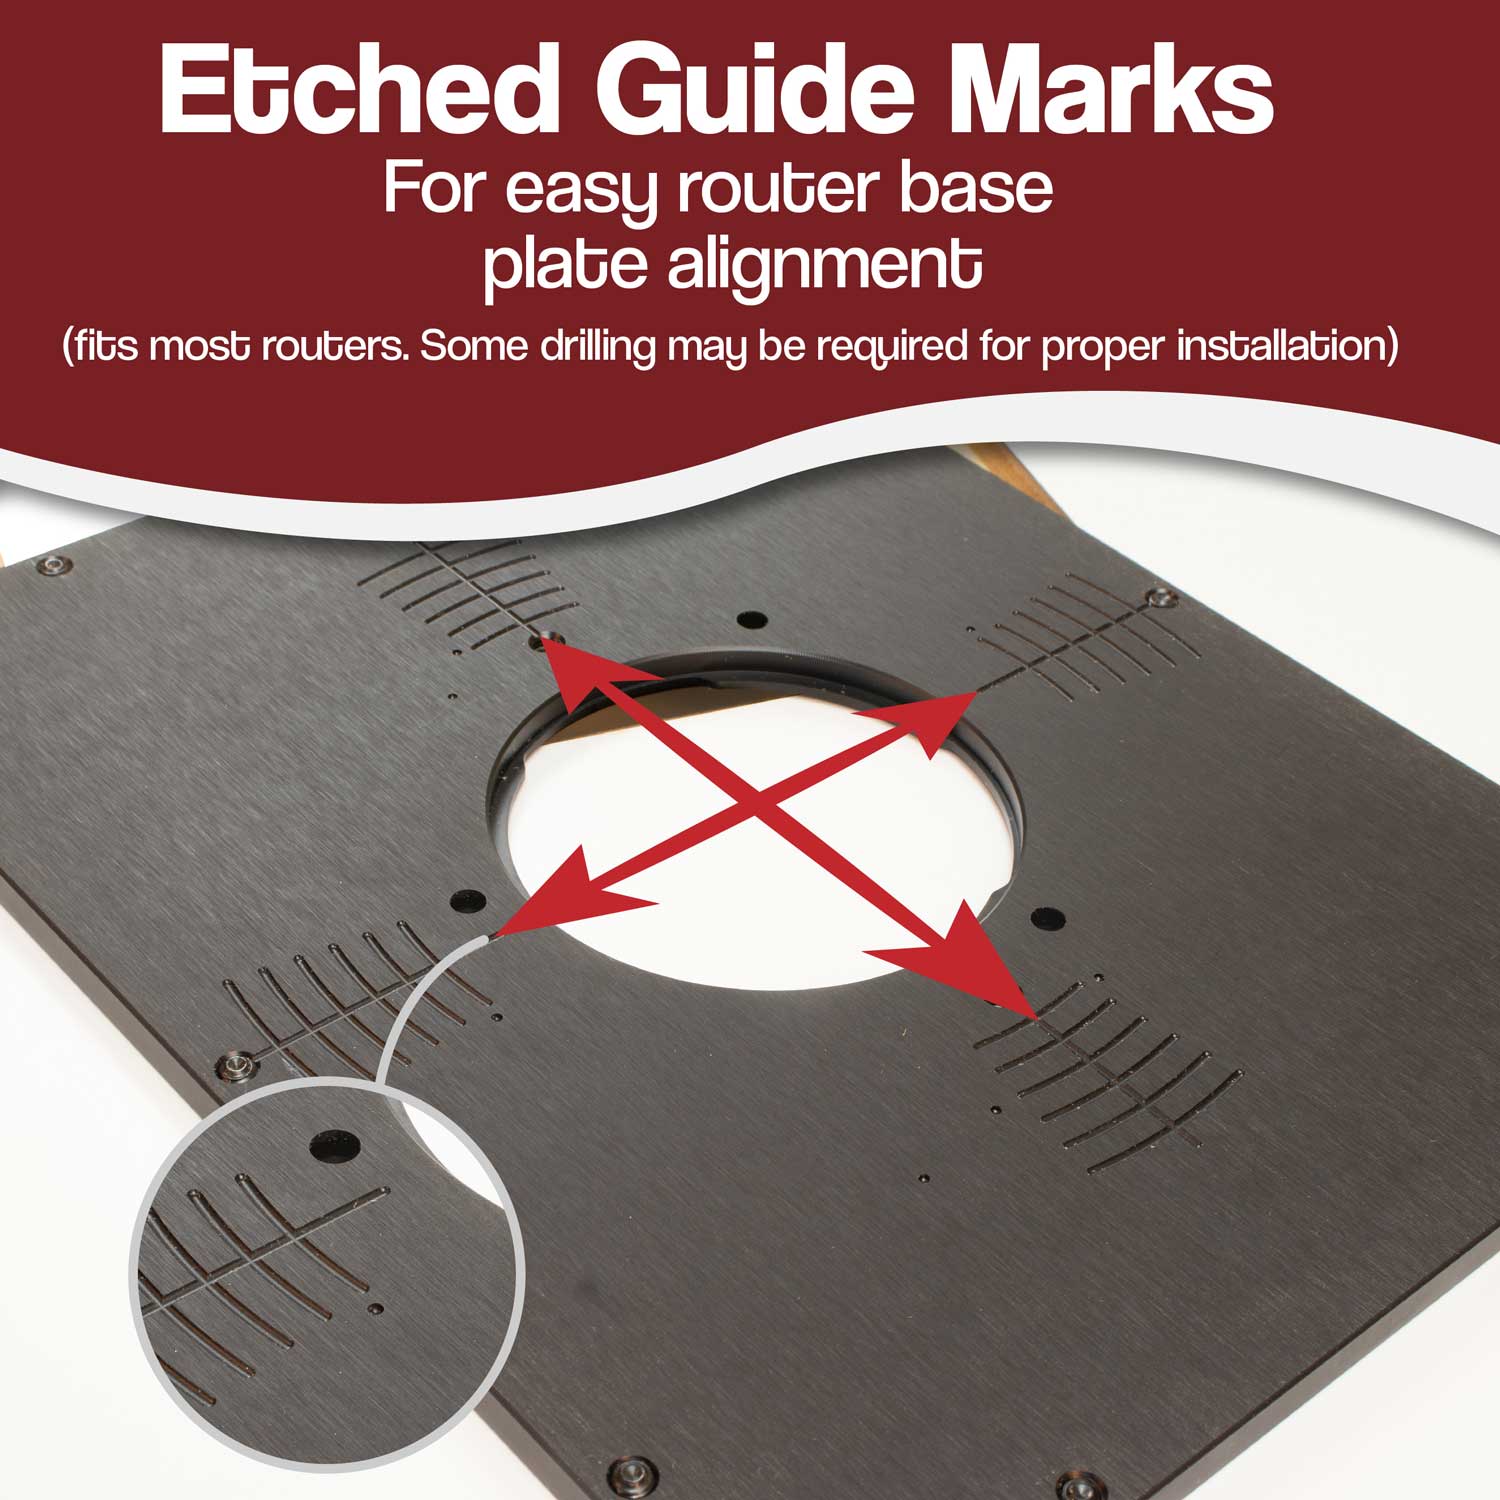 Etched guide marks for aligning most any brand of router